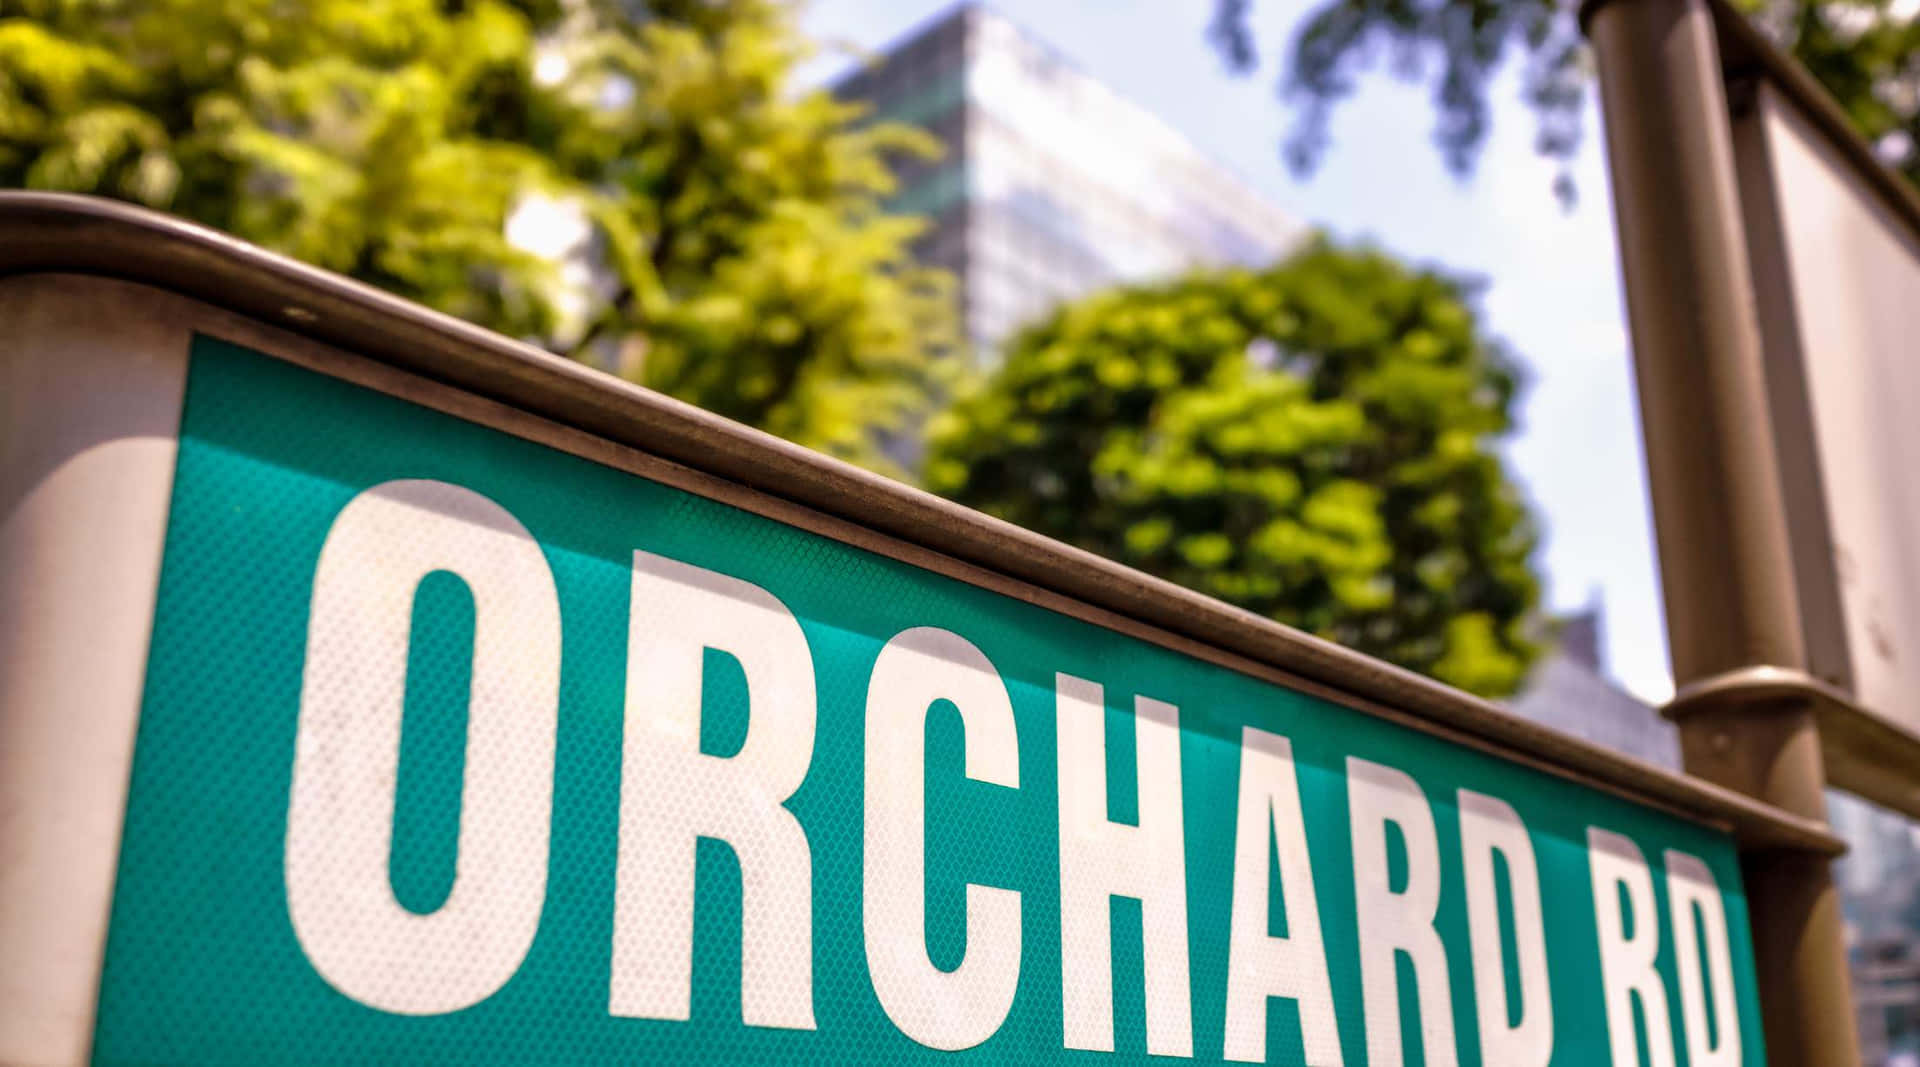 Orchard Road Sign Singapore Wallpaper